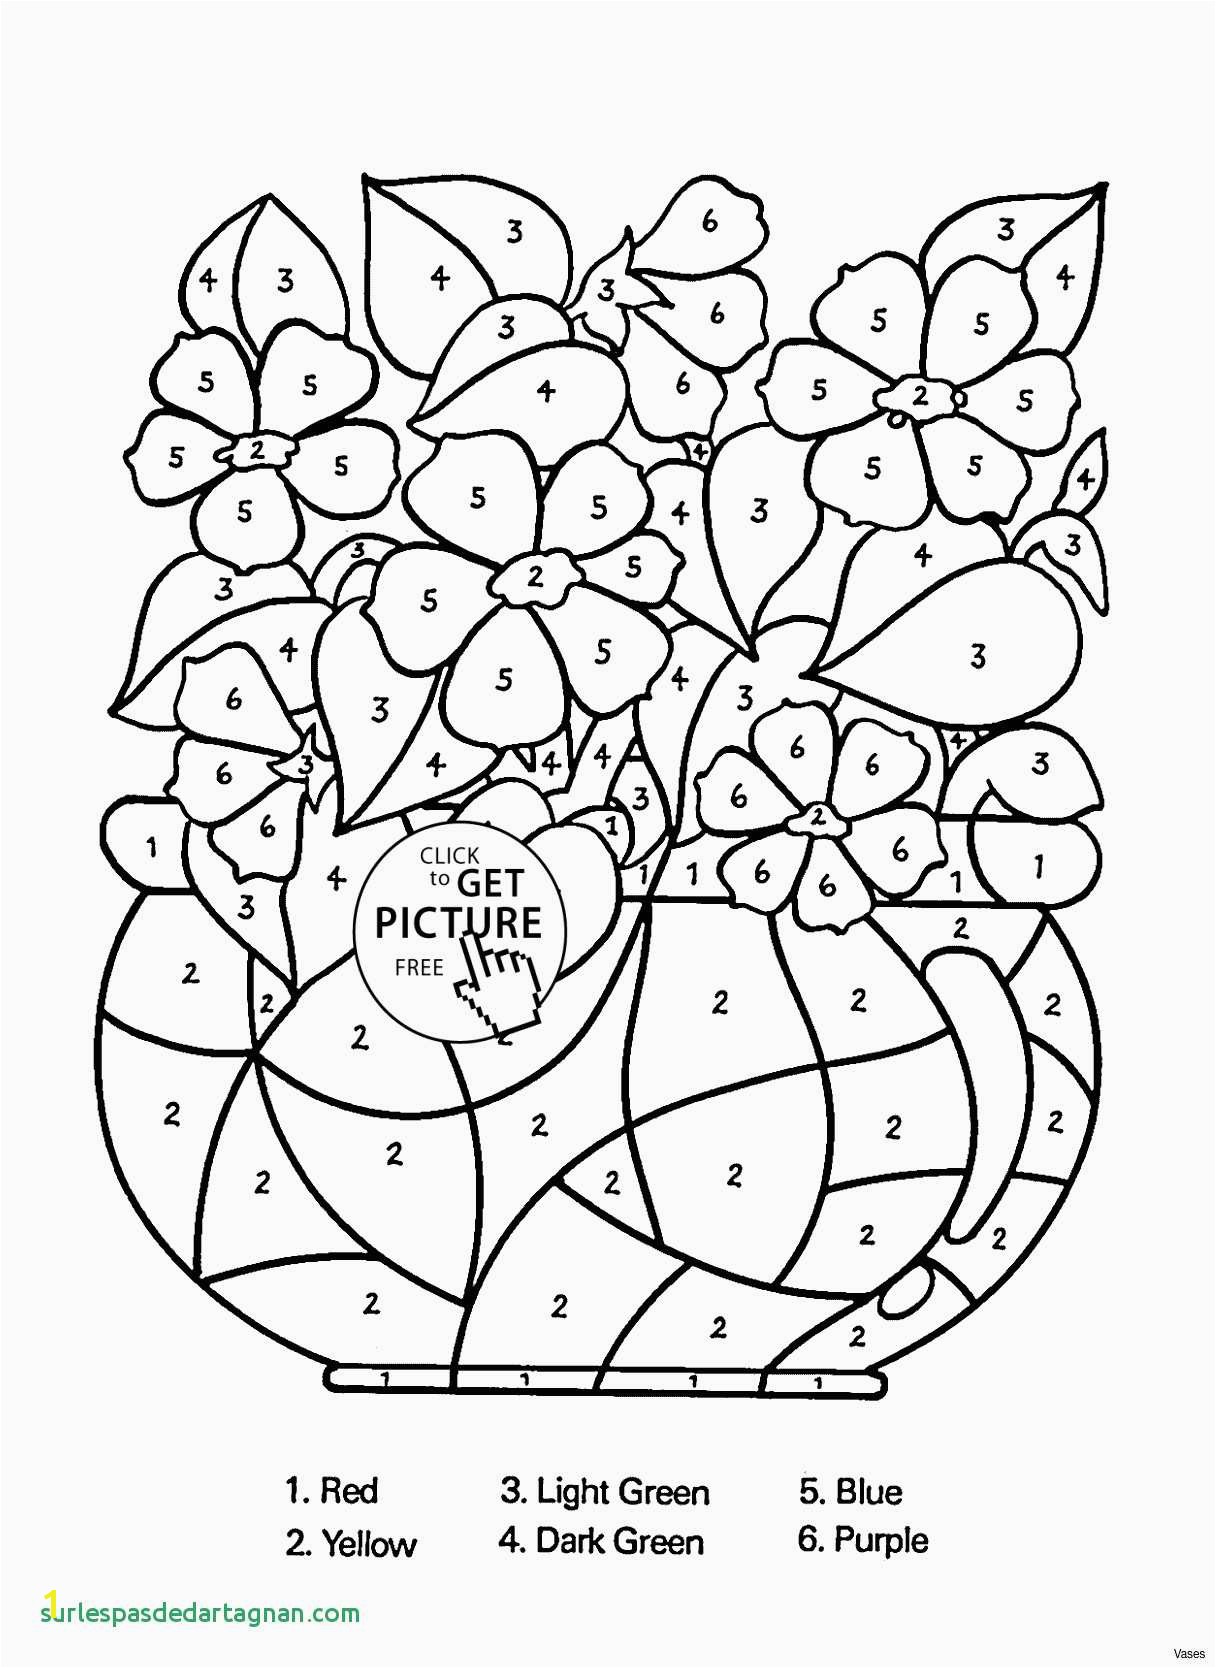 Stream Coloring Page Coloring Pages Free Printable Coloring Pages for Children that You